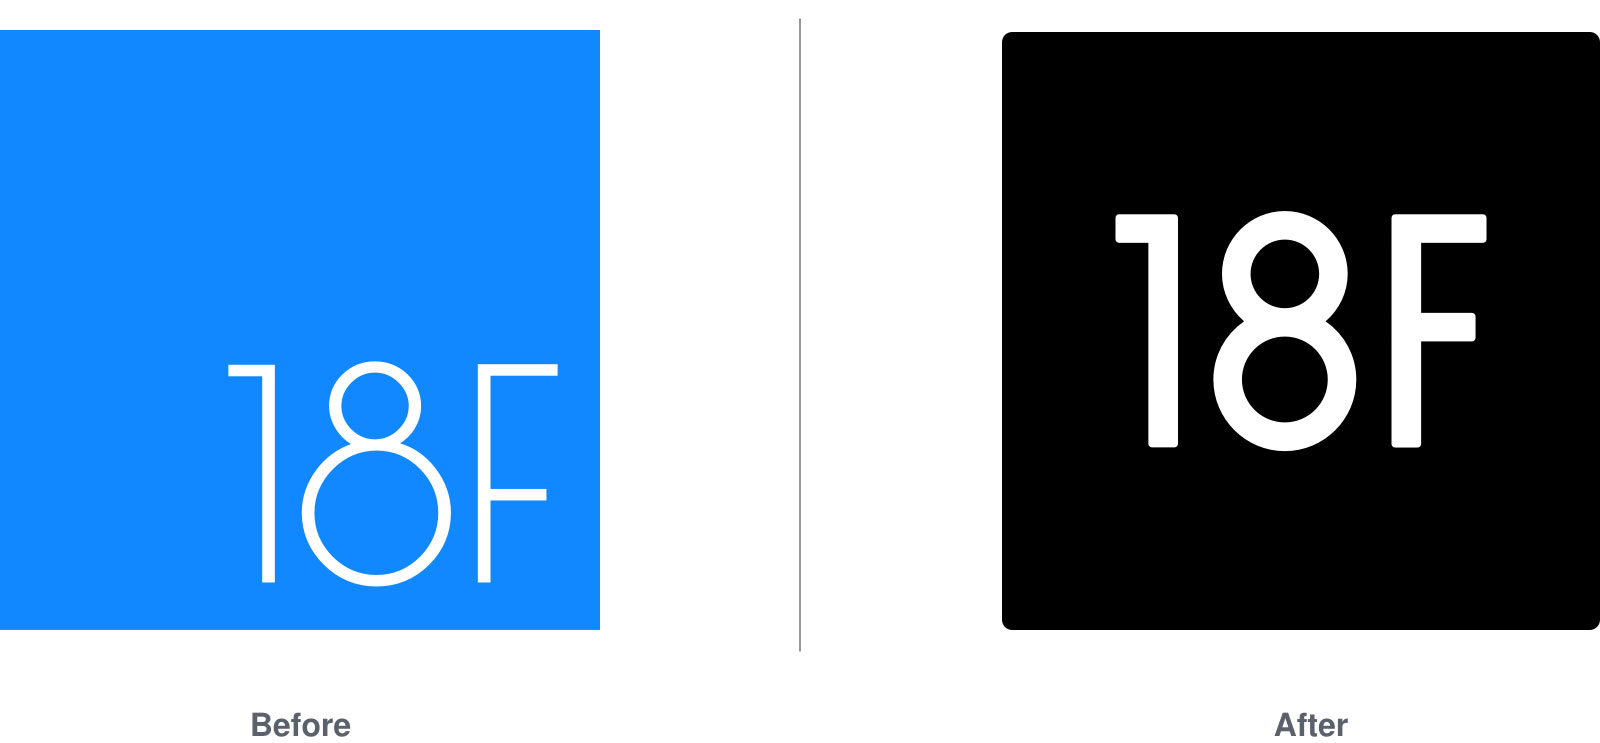 The old blue 18F logo and the new black 18F logo